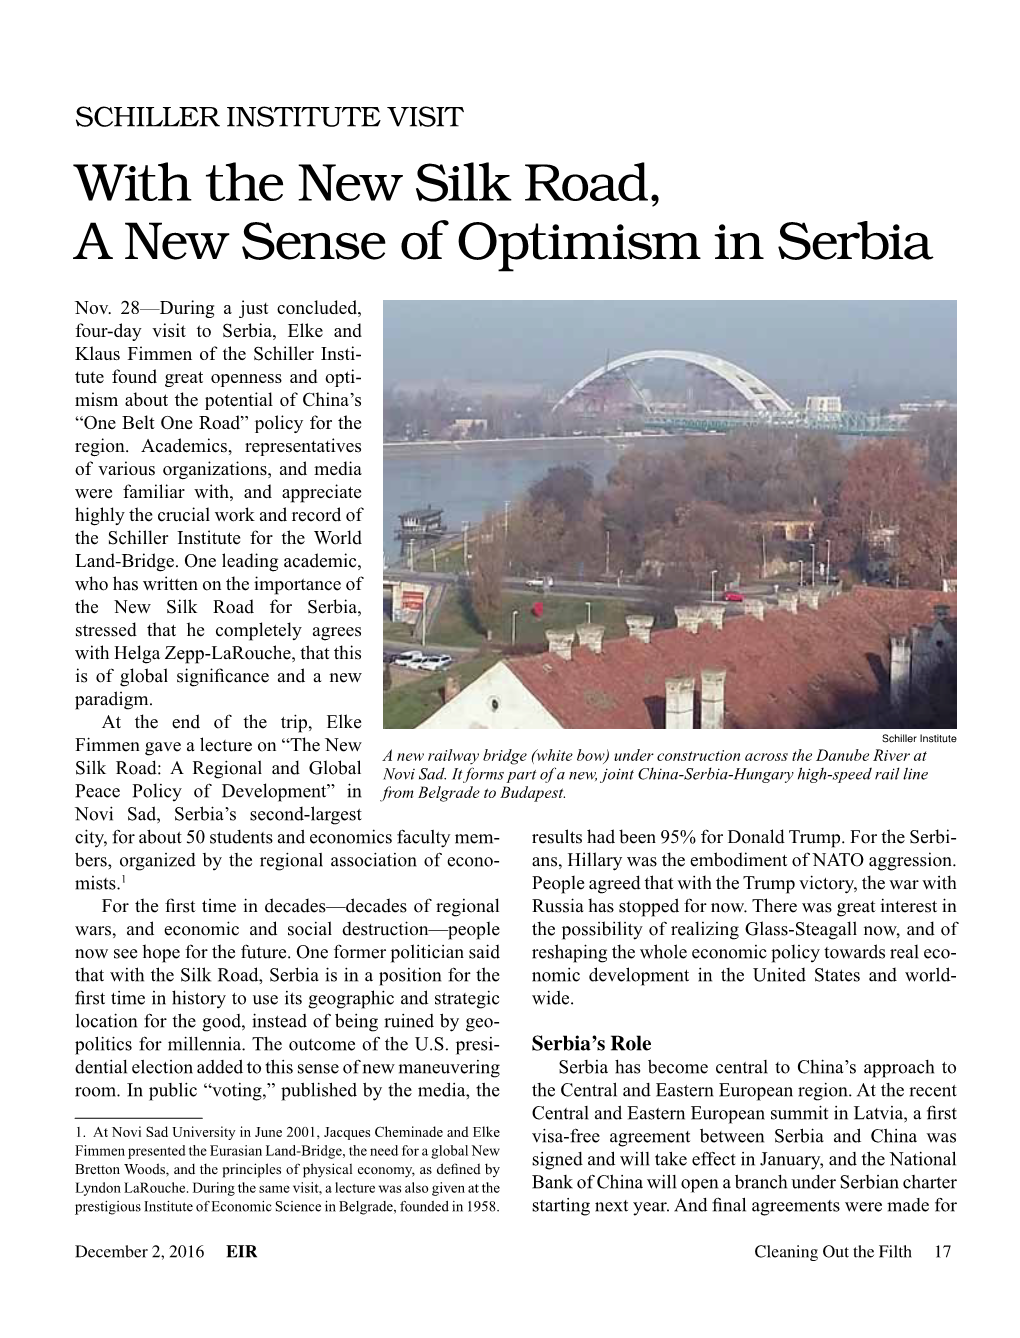 With the New Silk Road, a New Sense of Optimism in Serbia